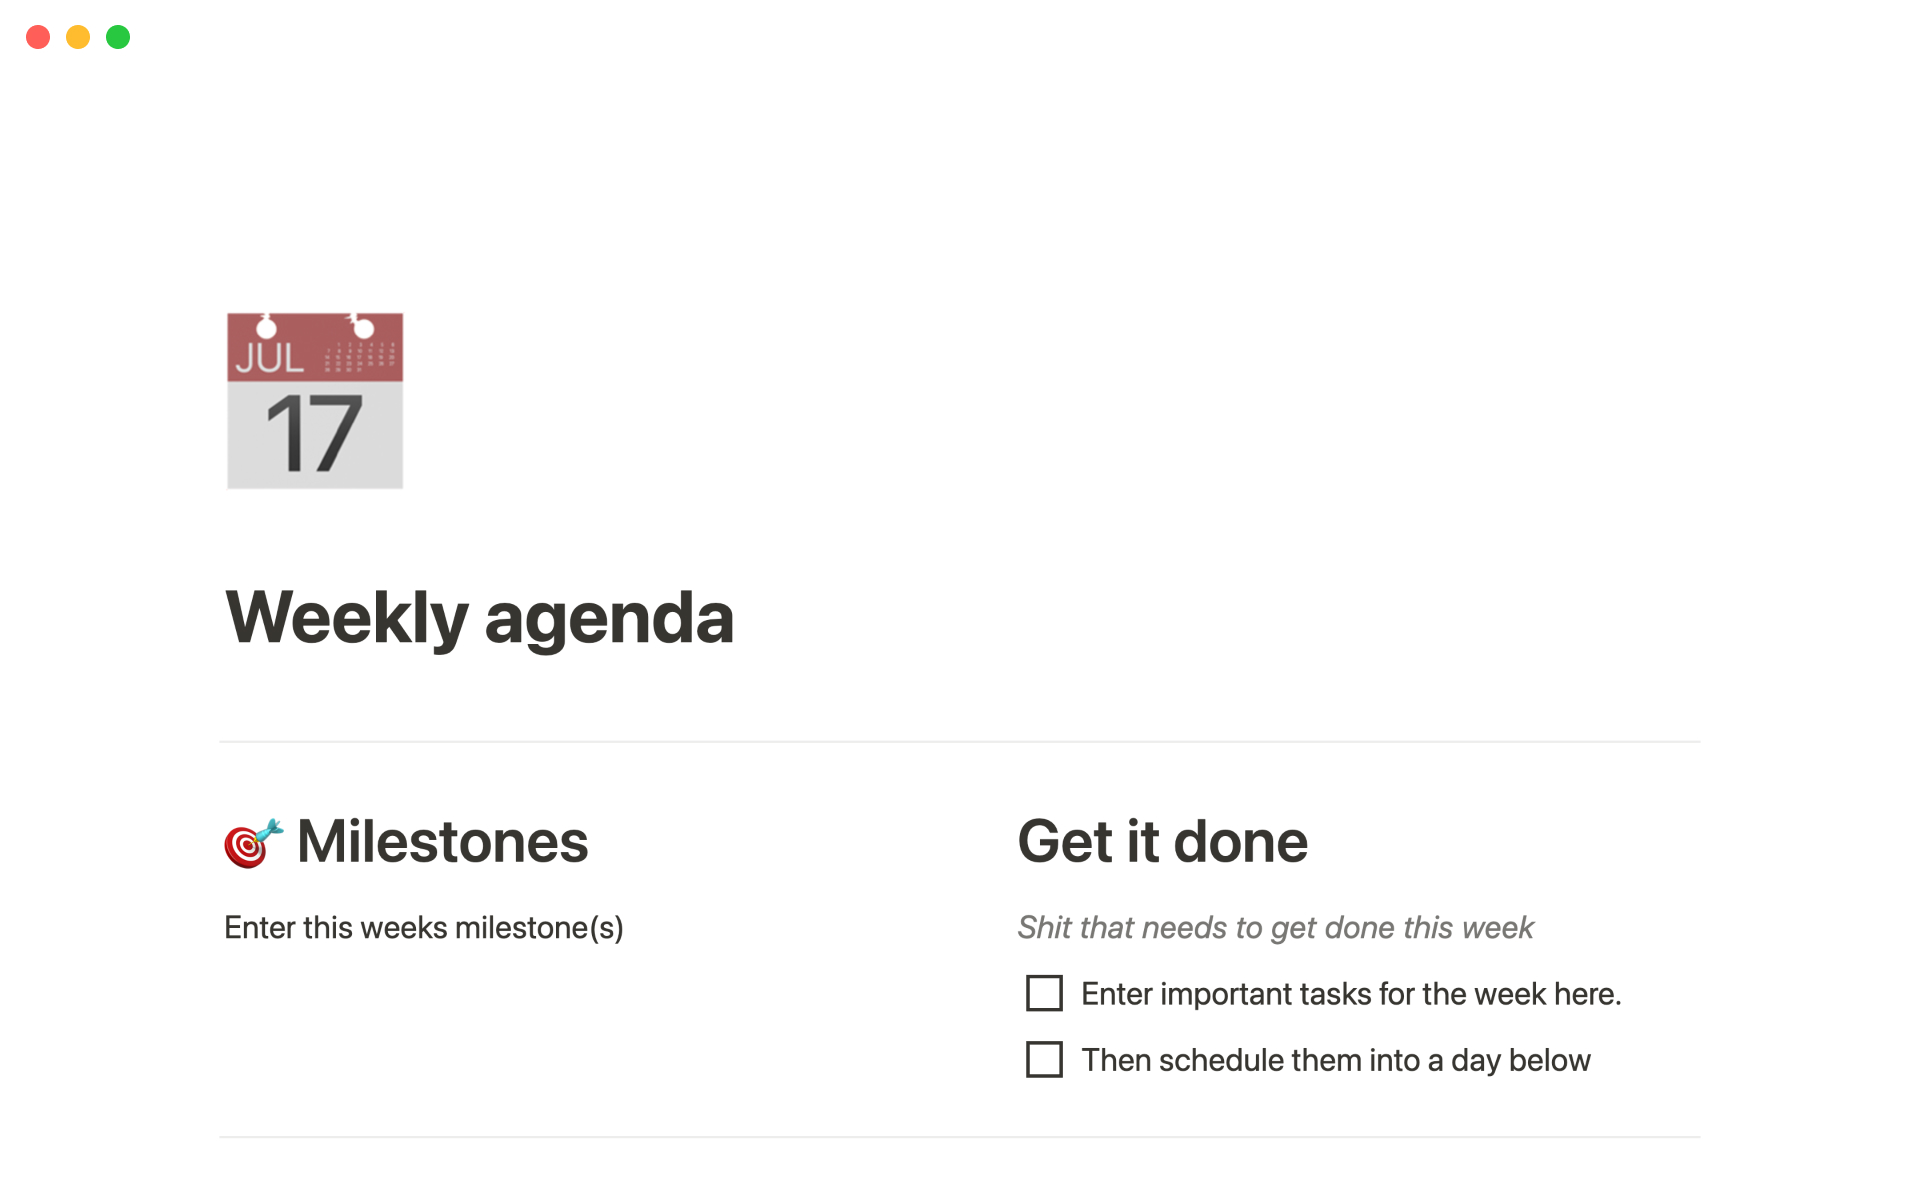 The desktop image for the Weekly agenda template